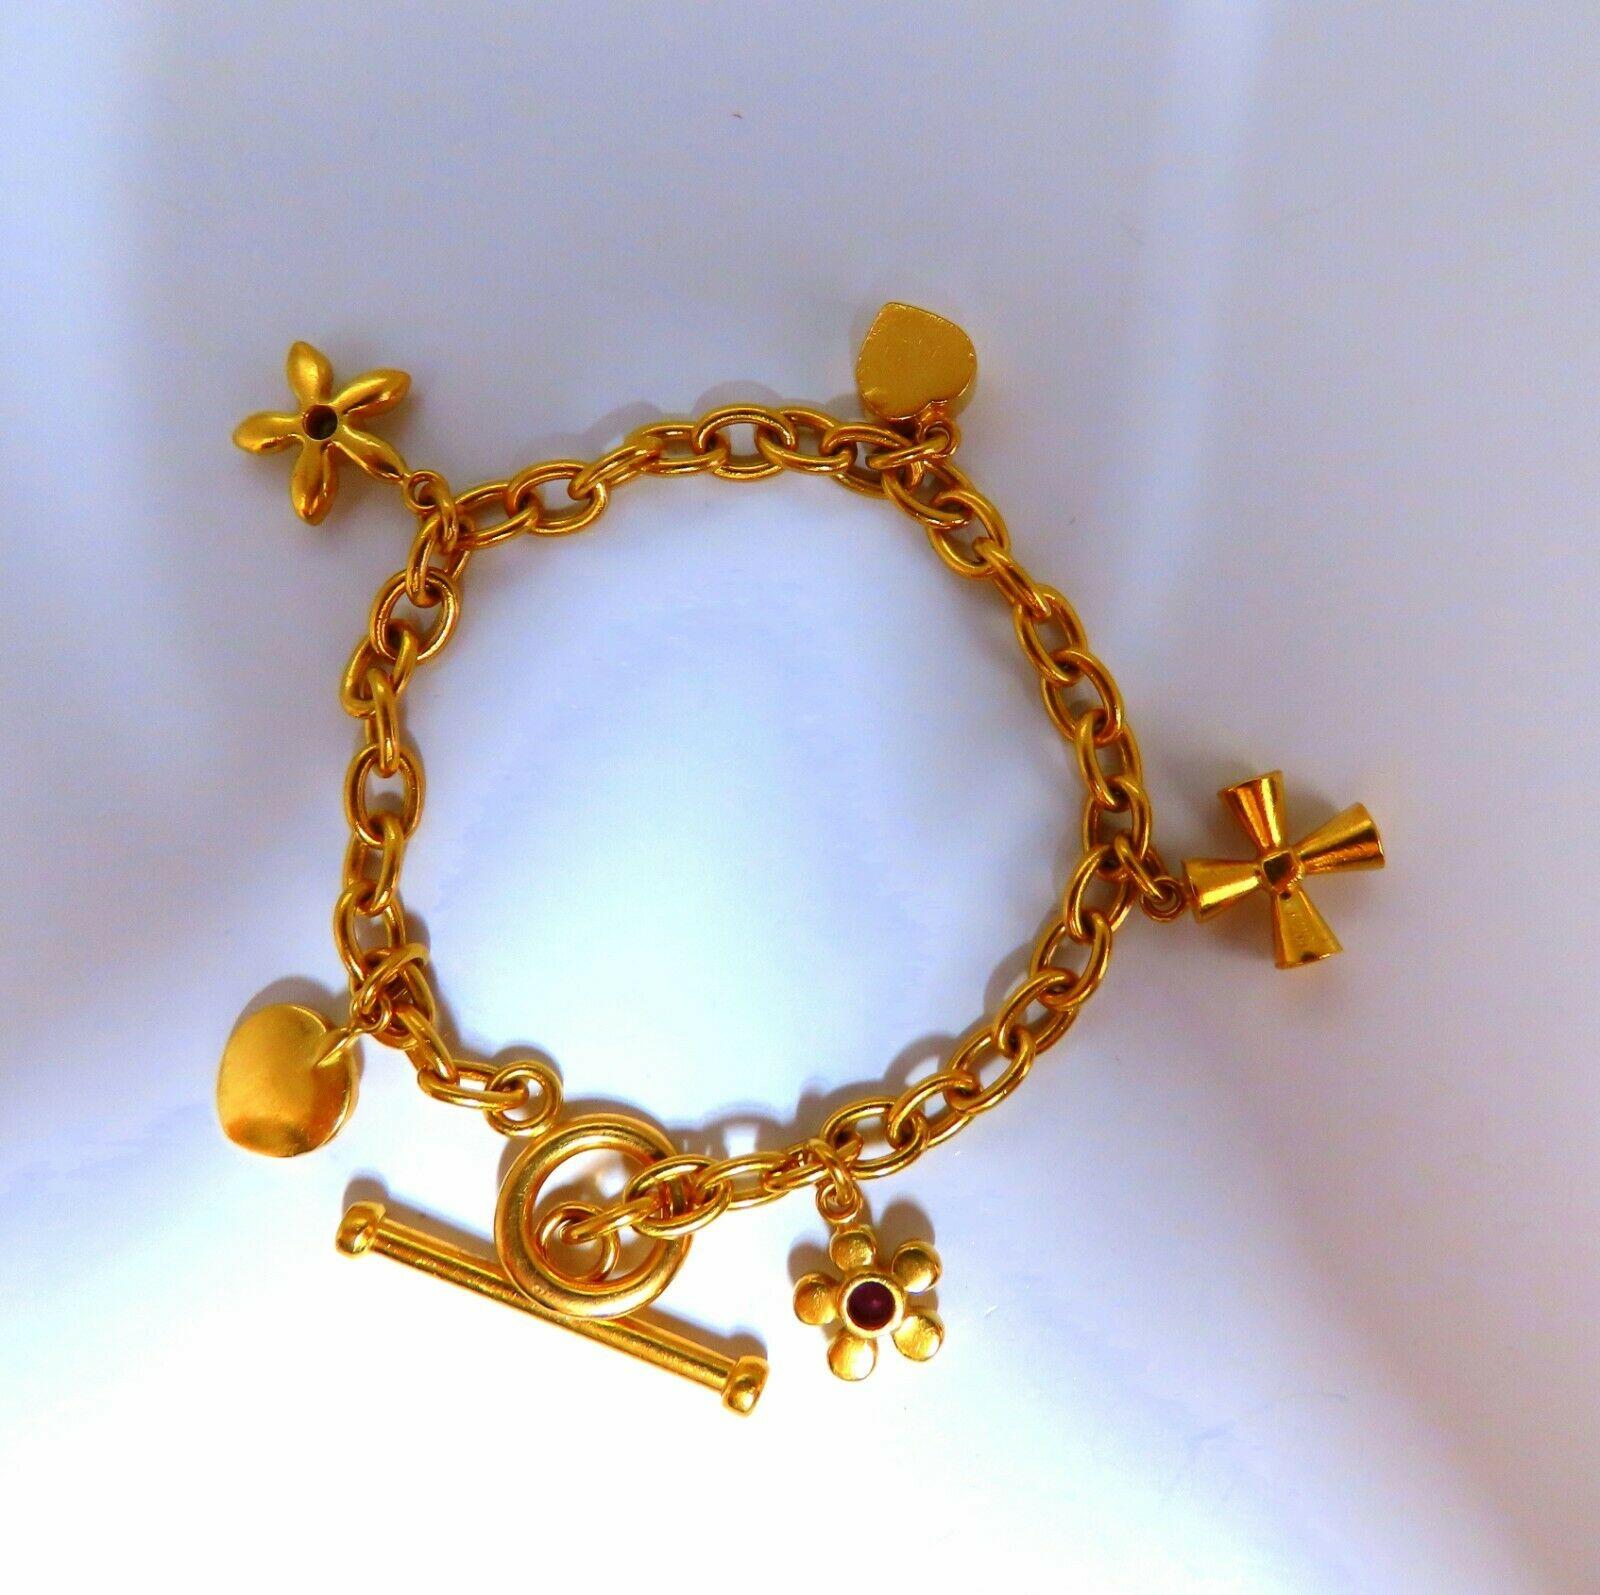 GORGEOUS CHARM BRACELET


5 Statement charms. 

31.5 grams
22kt yellow gold.

7 inches

Gorgeous Matte Satin Finish

5mm wide caliber

.15ct Round Diamonds on Side of Toggle

Safety chain & Pressure clasp.